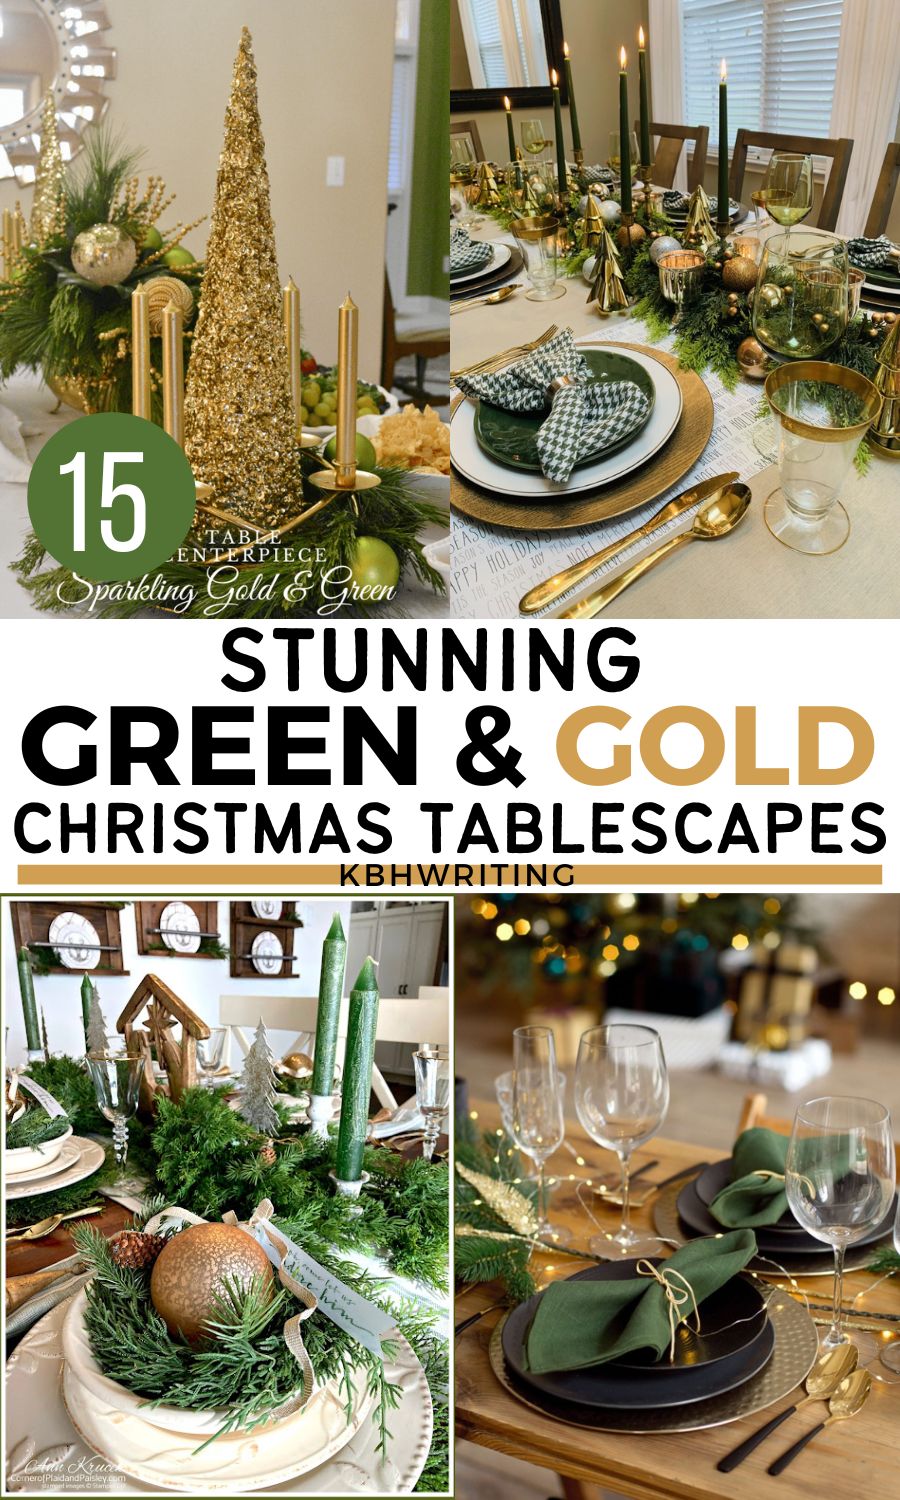 Green & Gold Christmas Tablescapes